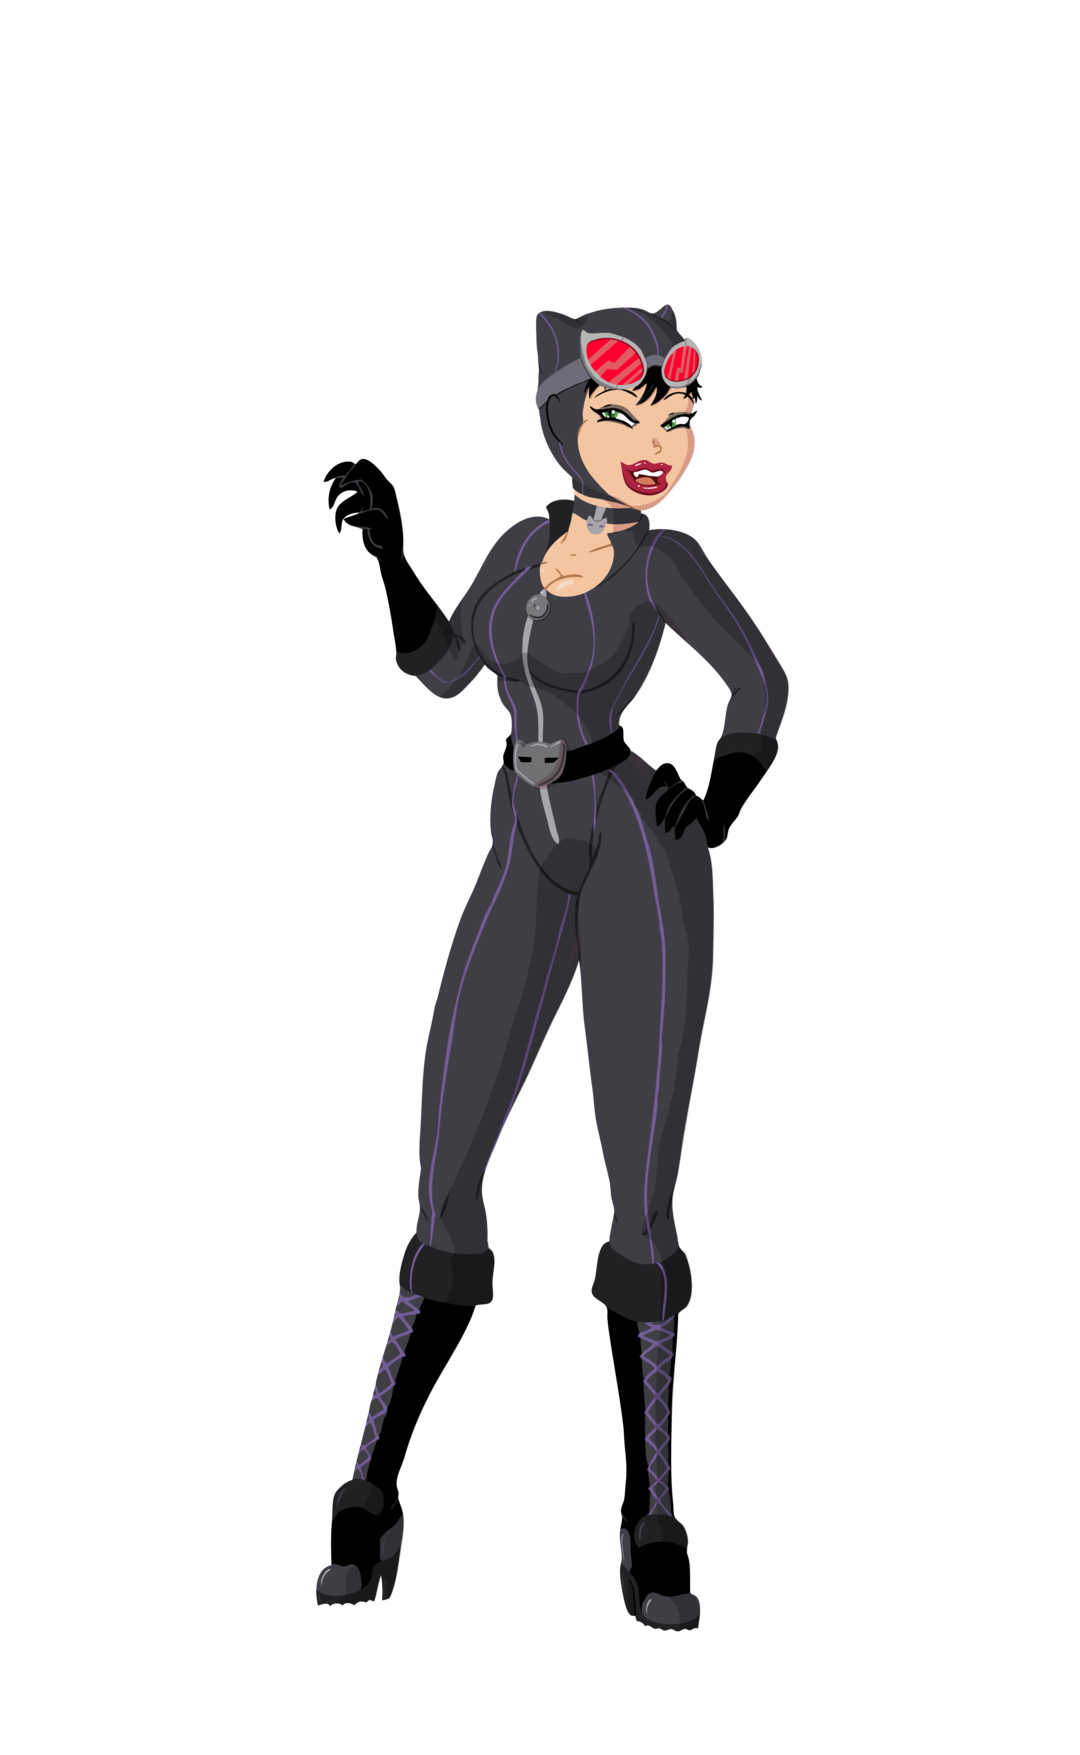 Catwoman PNG Image in High Definition pngteam.com